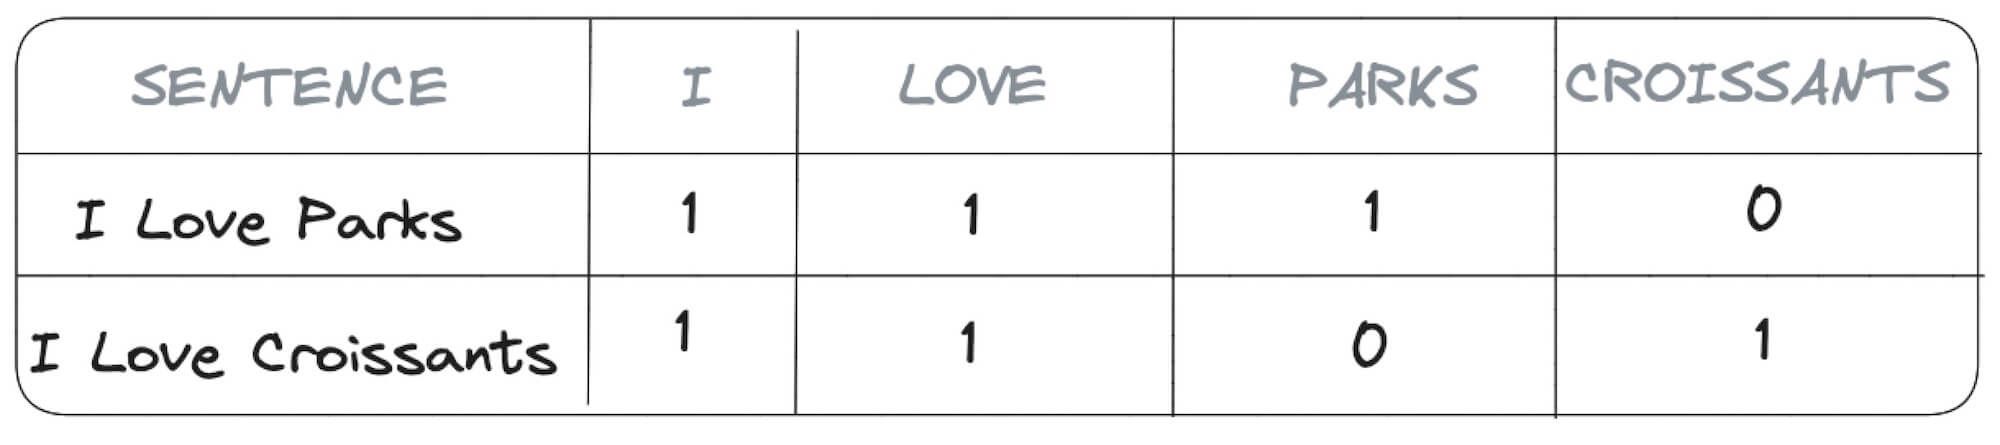 Table containing three columns named LOVE, PARKS, CROISSANTS with value 0 or 1 depending on the presence of the word in the phrase